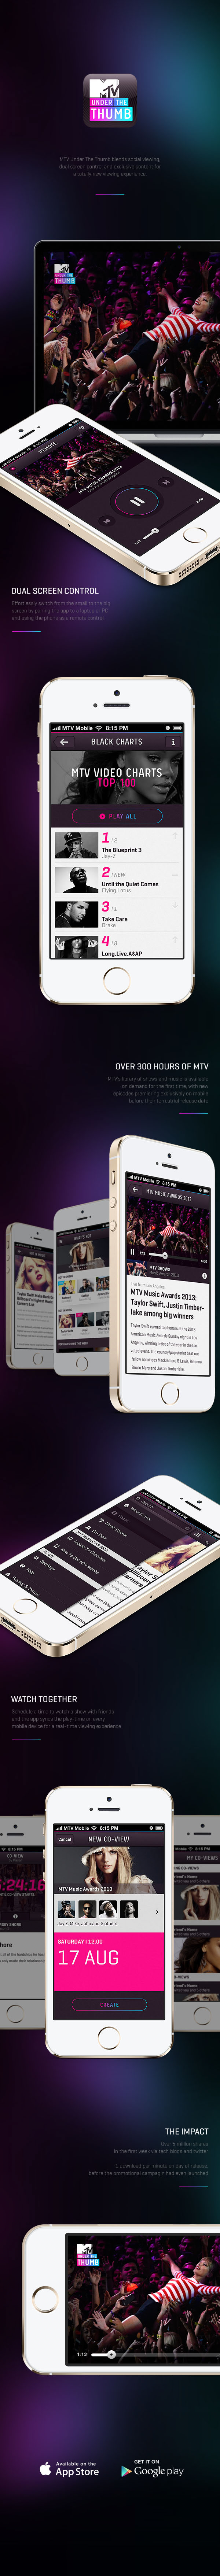 Mtv mobile iphone android app shows second screen Dual Screening